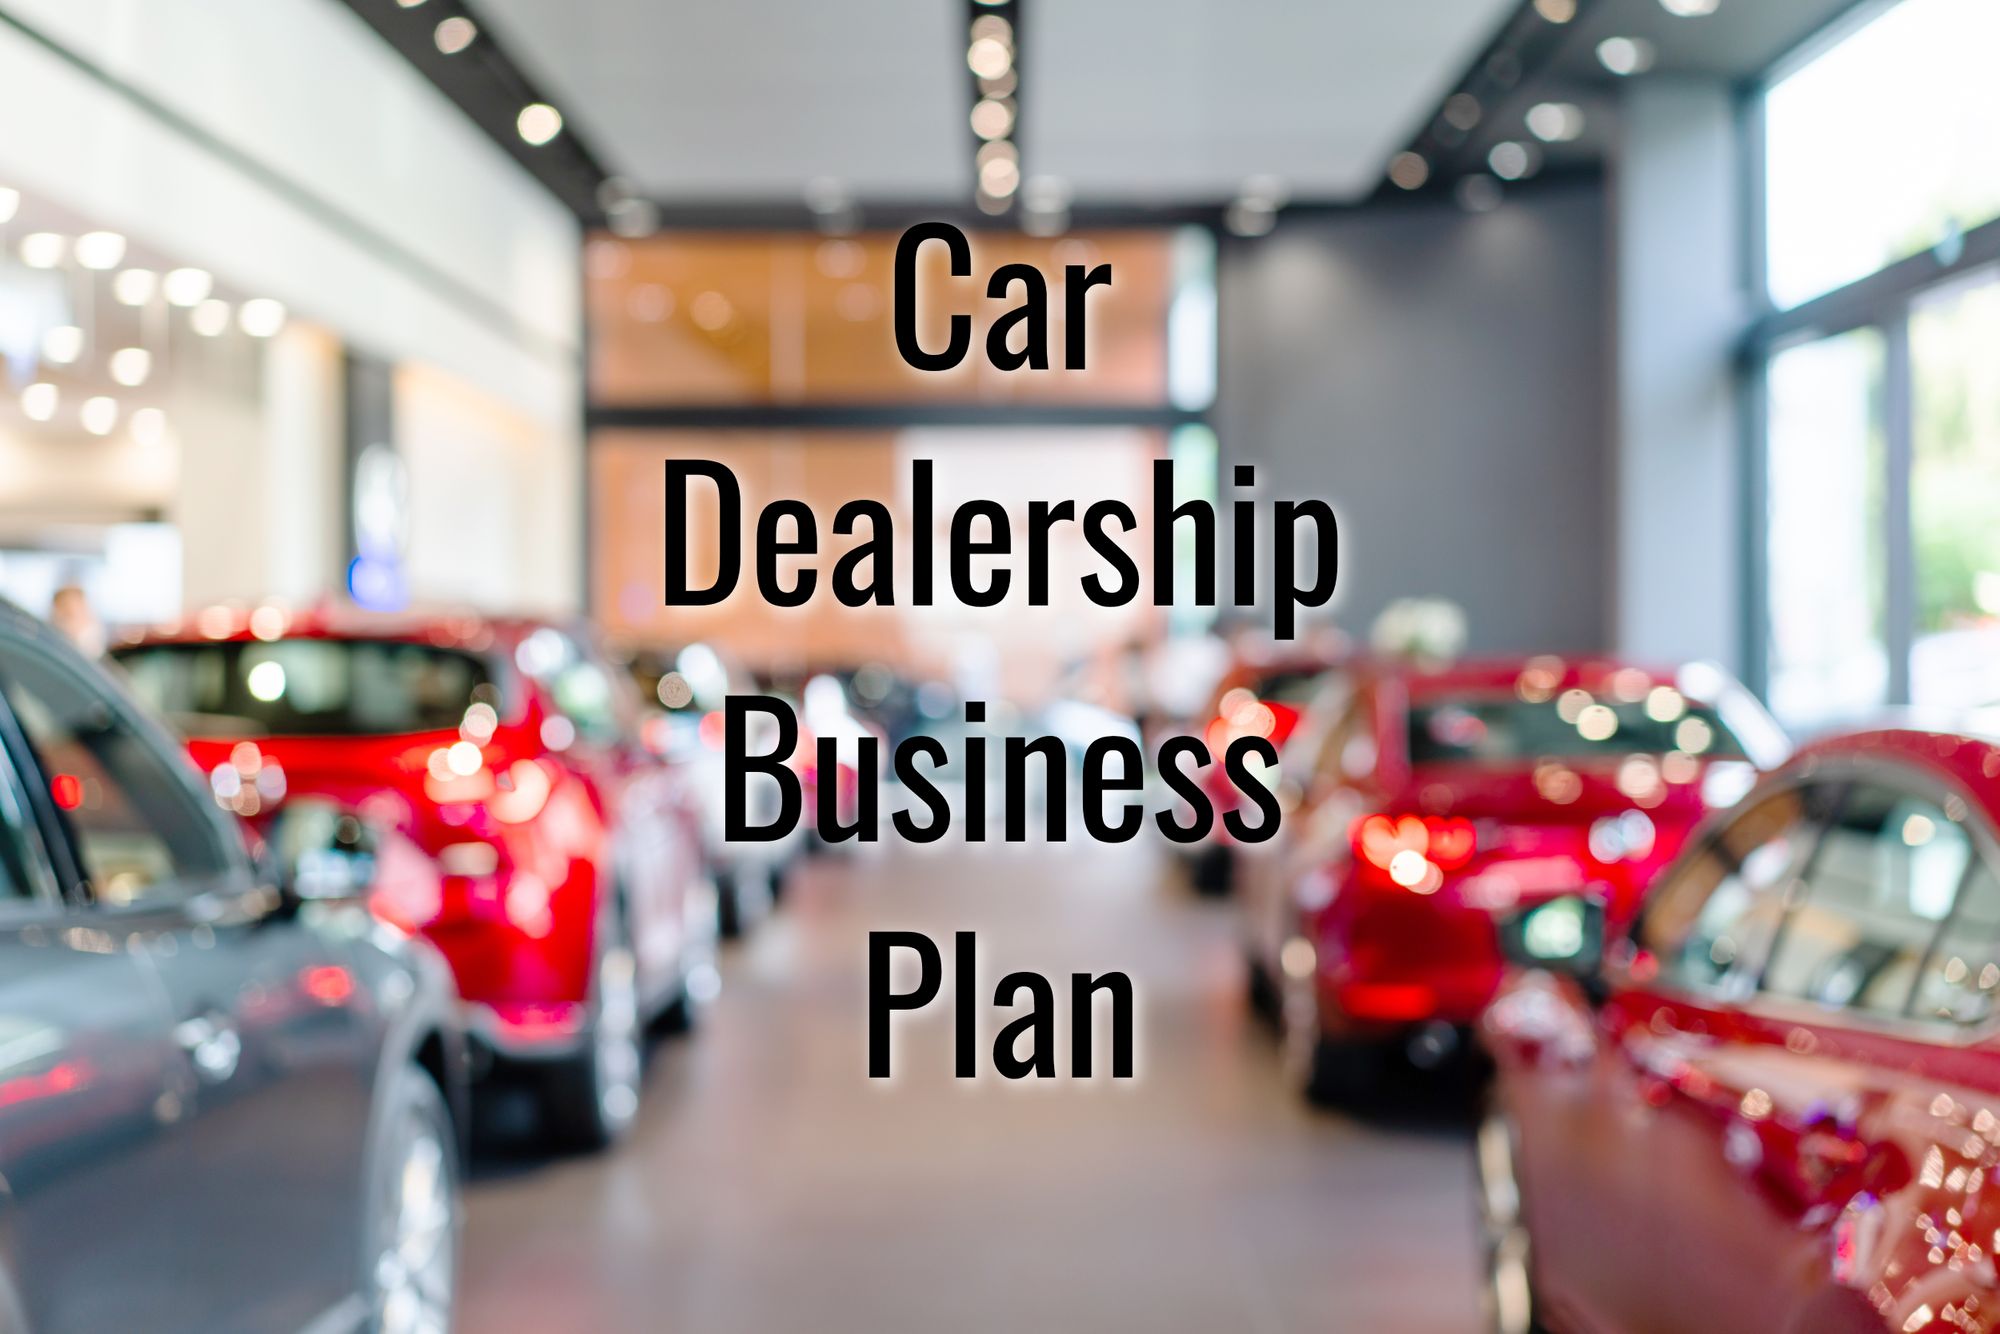 How to start a Car Dealership in India? Here are some easy ...